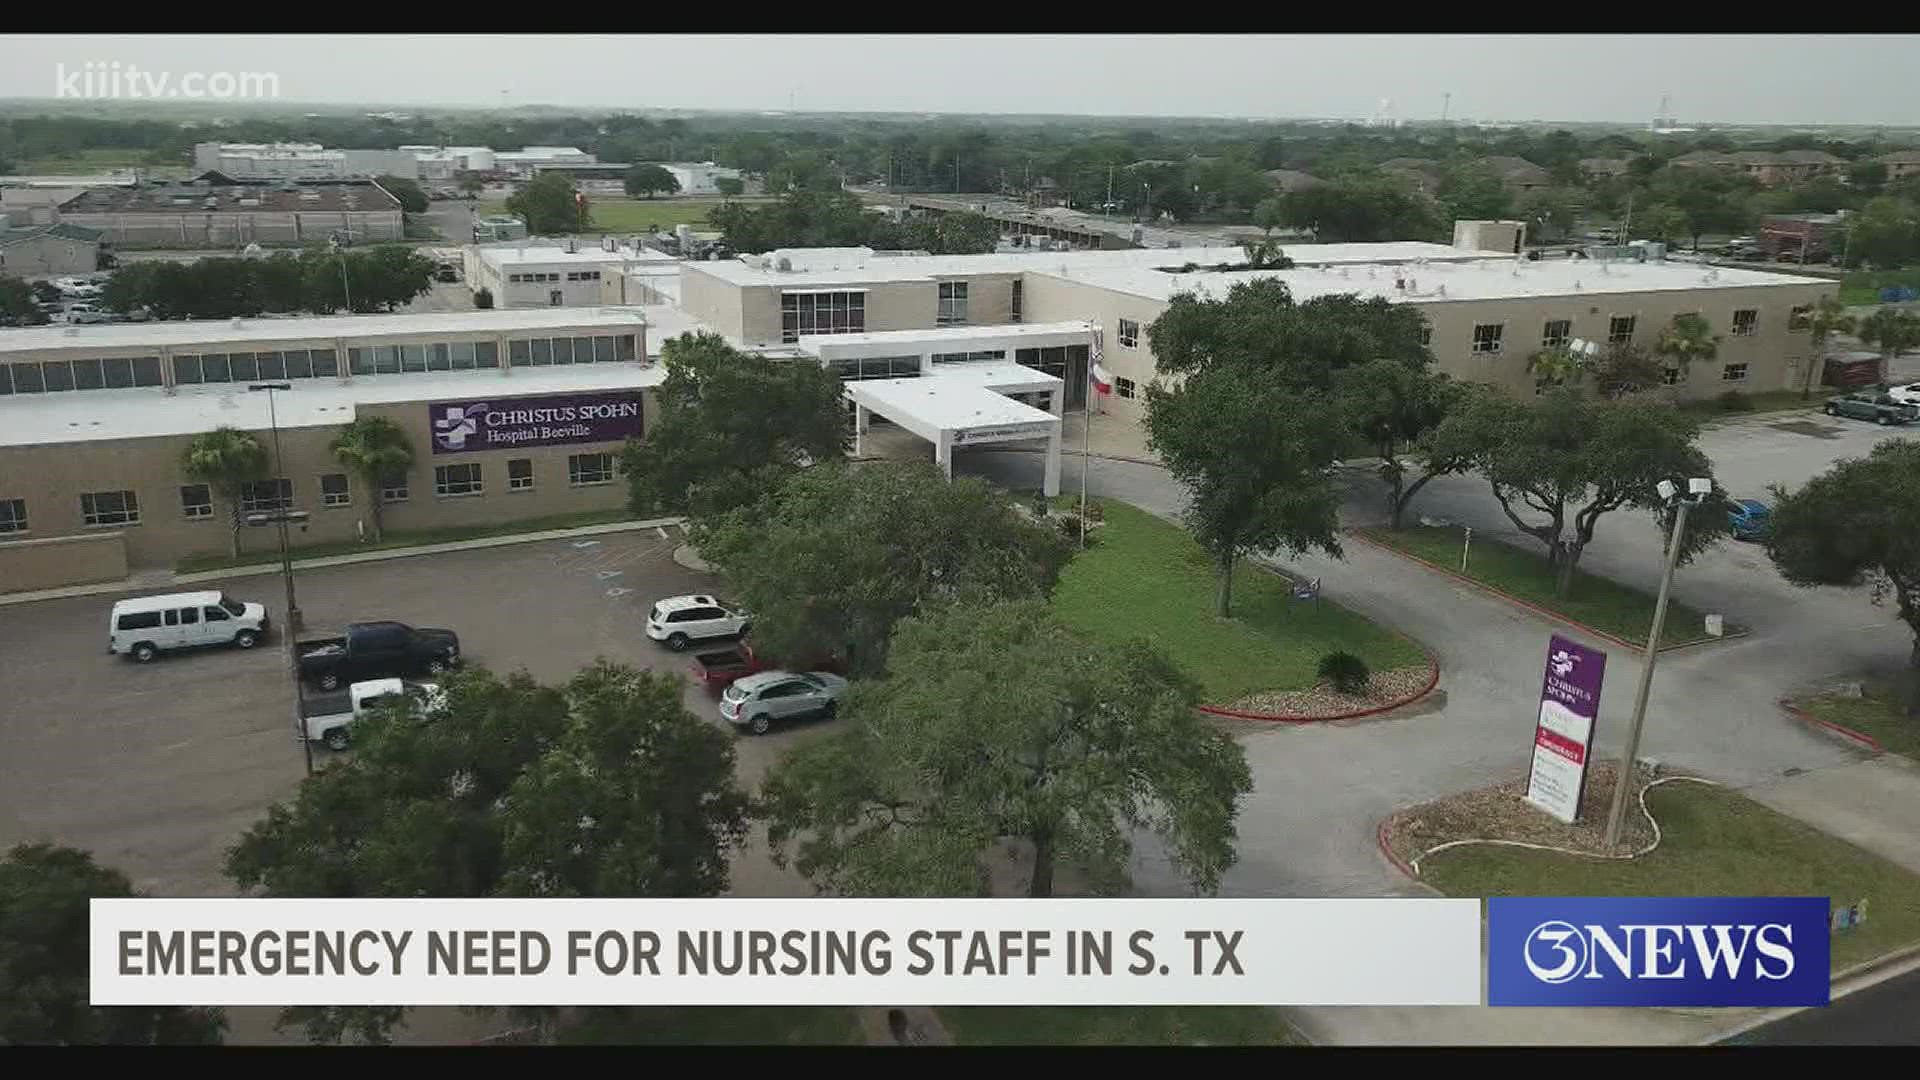 3News spoke with Nueces County Judge Barbara Canales and Kleberg County Judge Rudy Madrid about the need for nurses.